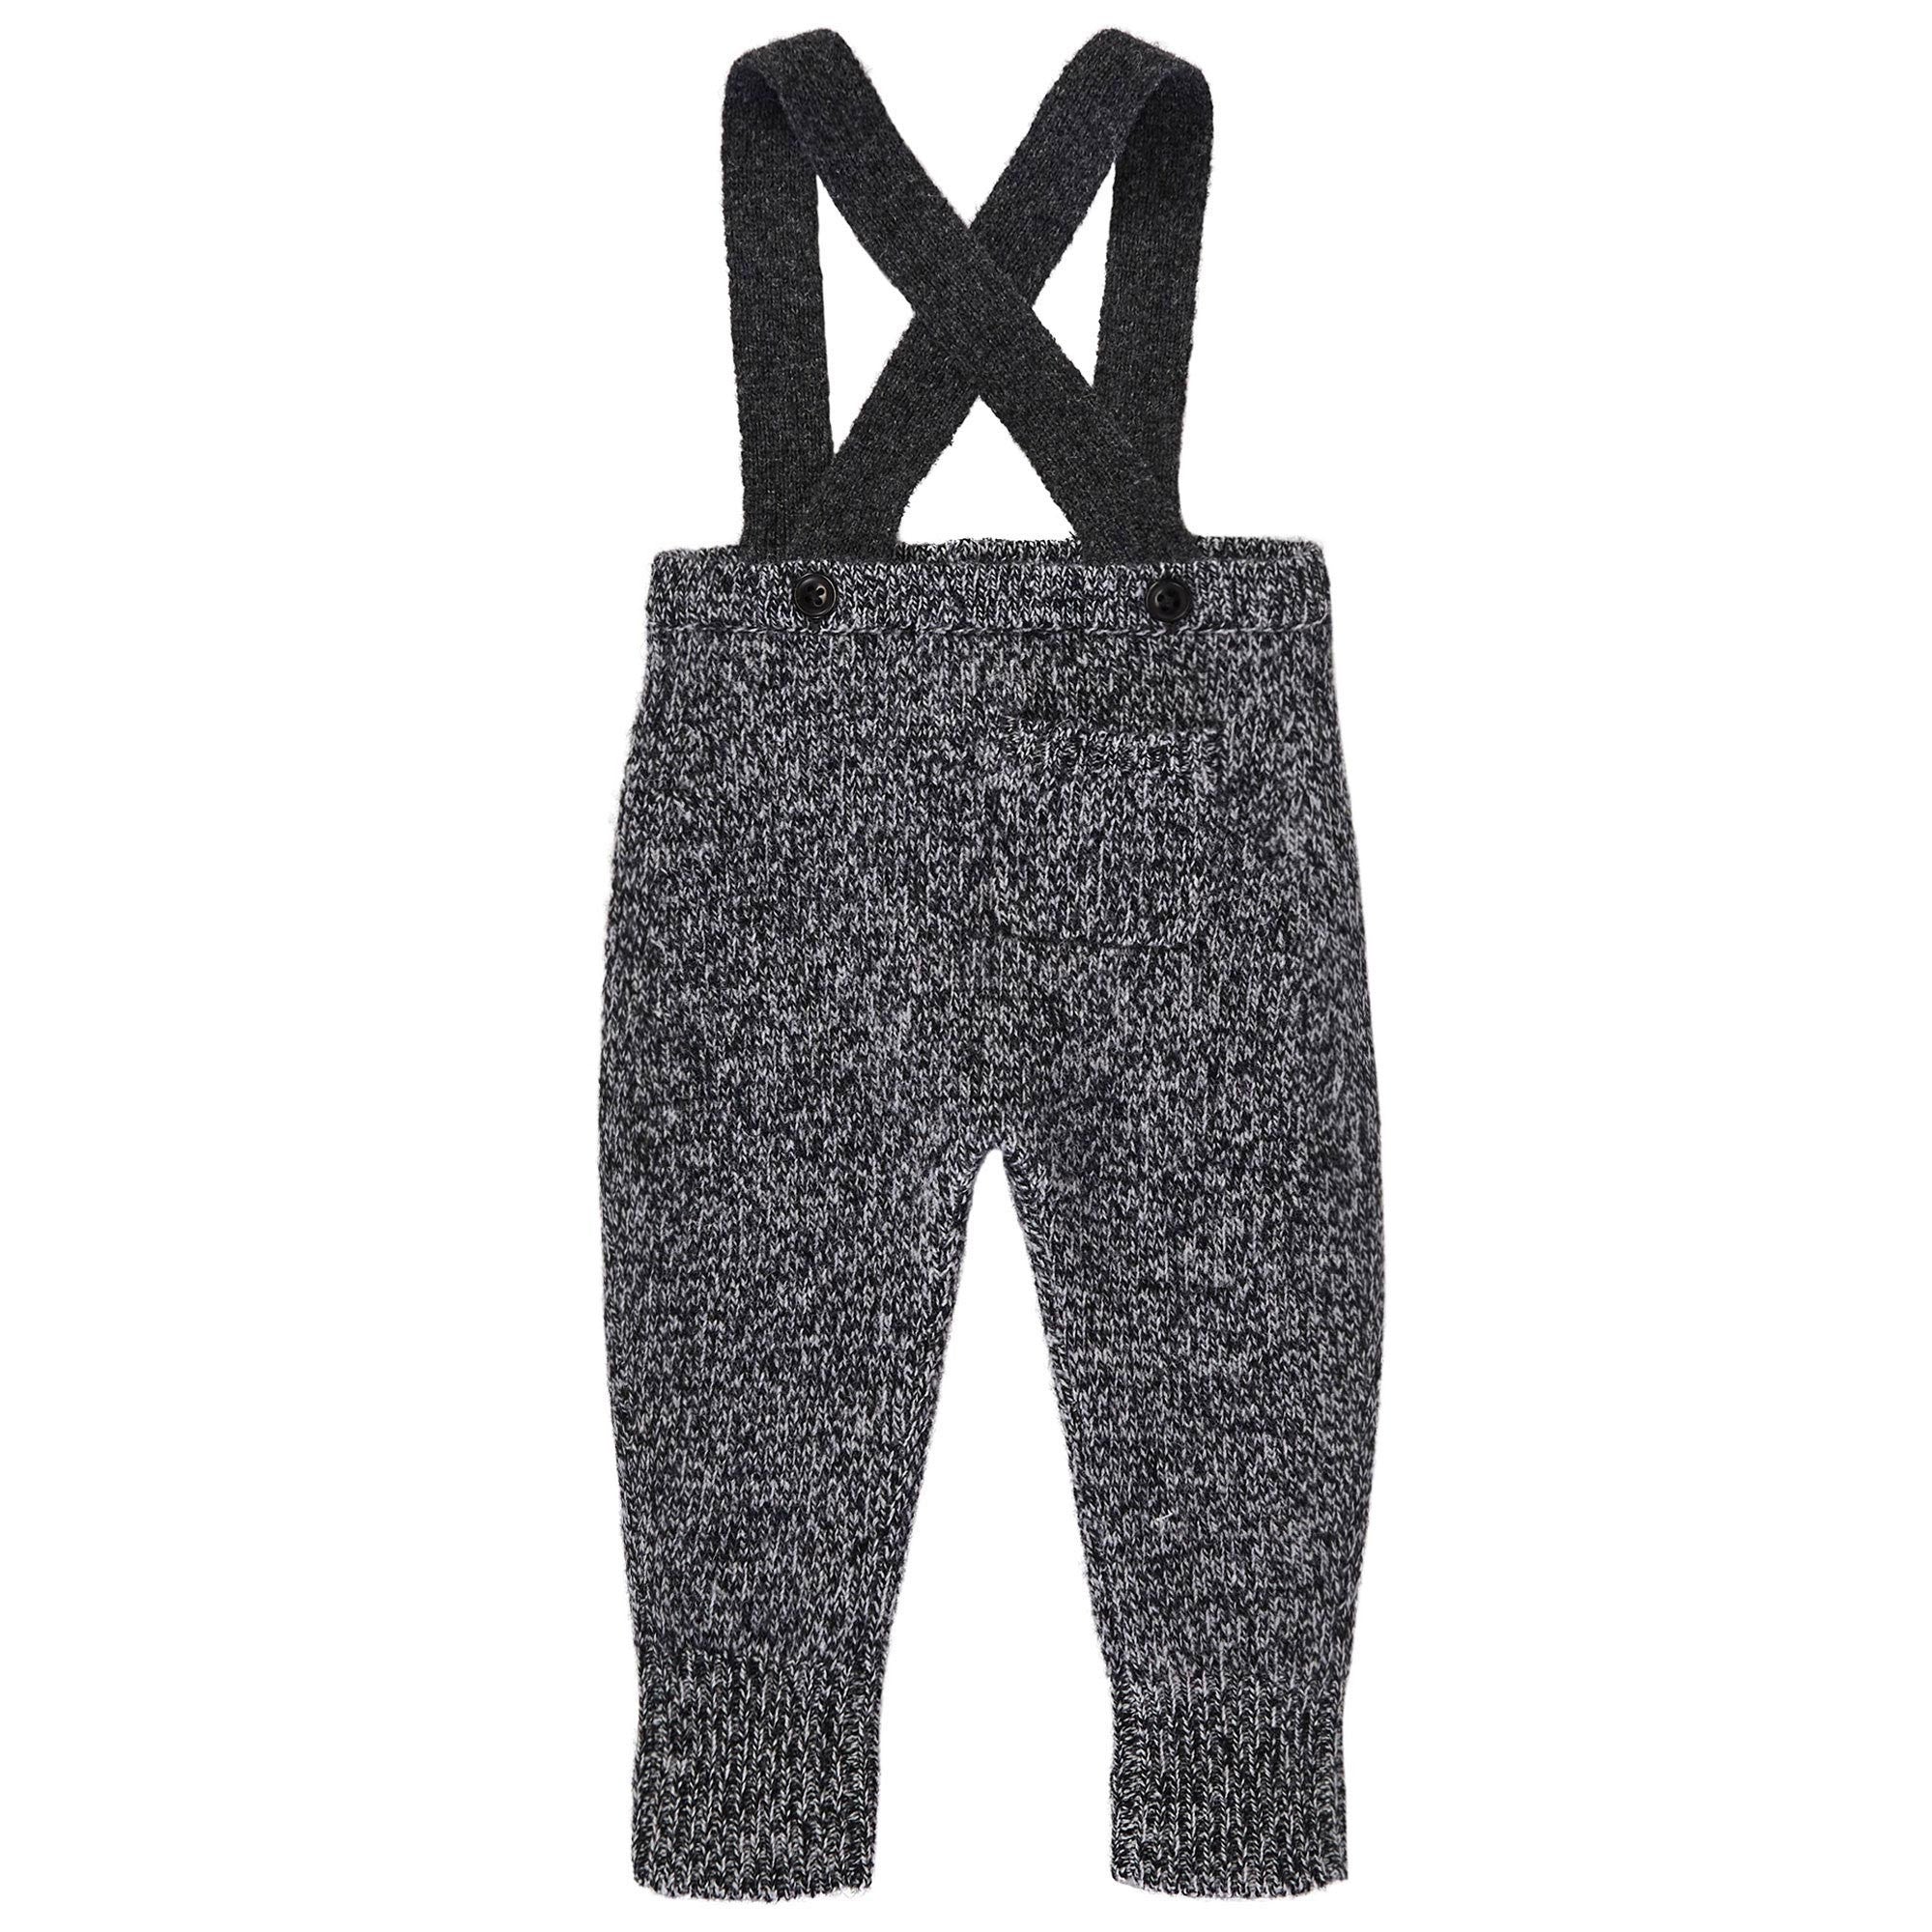 Baby Black Knitted Wool Dungaree - CÉMAROSE | Children's Fashion Store - 2